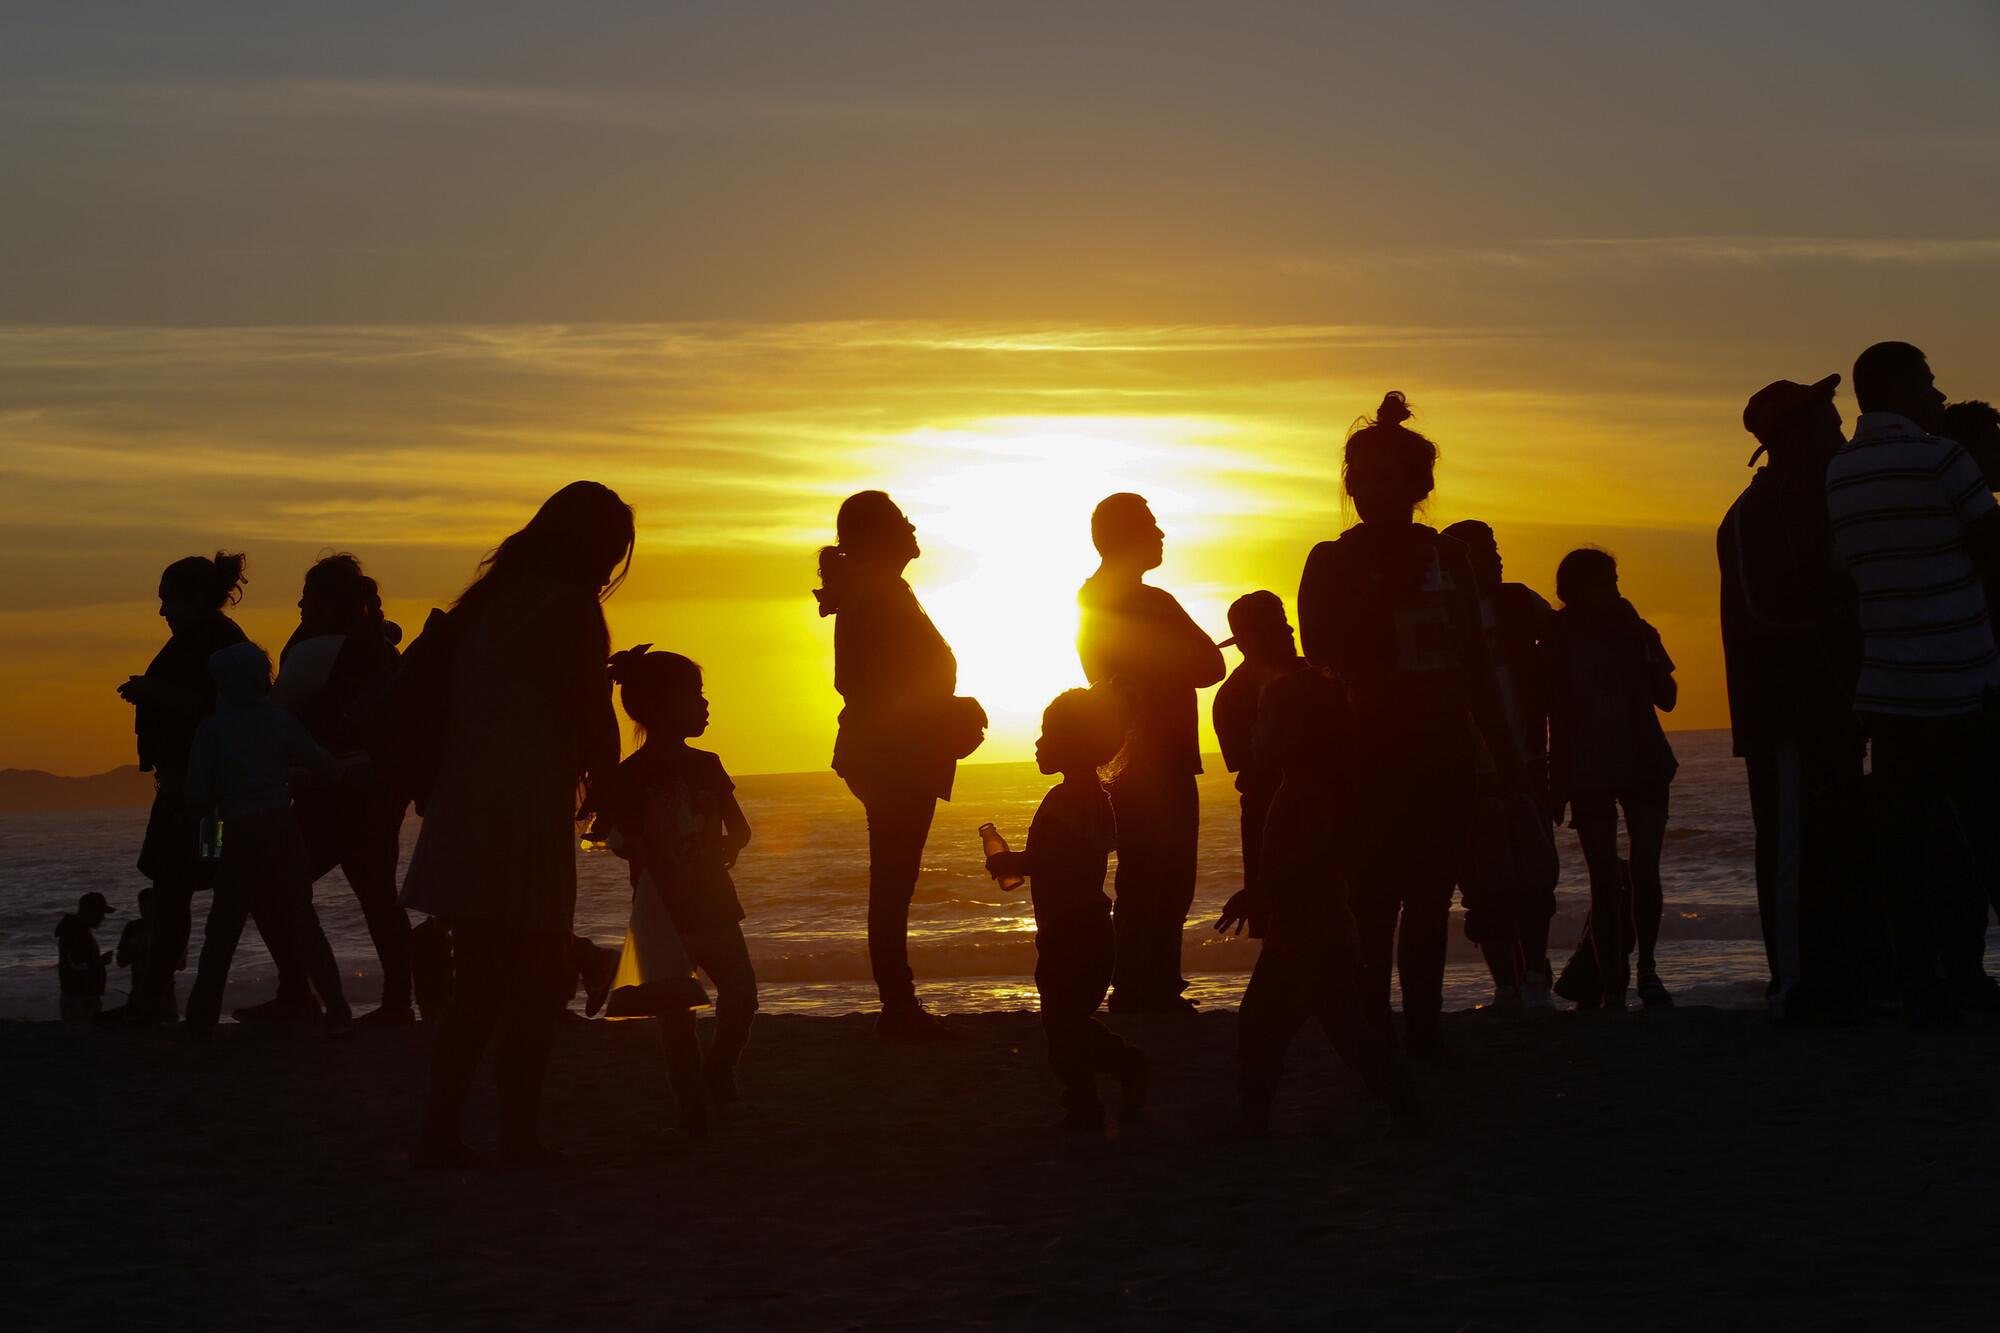 A group of Central American migrants silhouetted by the sunset at the beach by the border fence